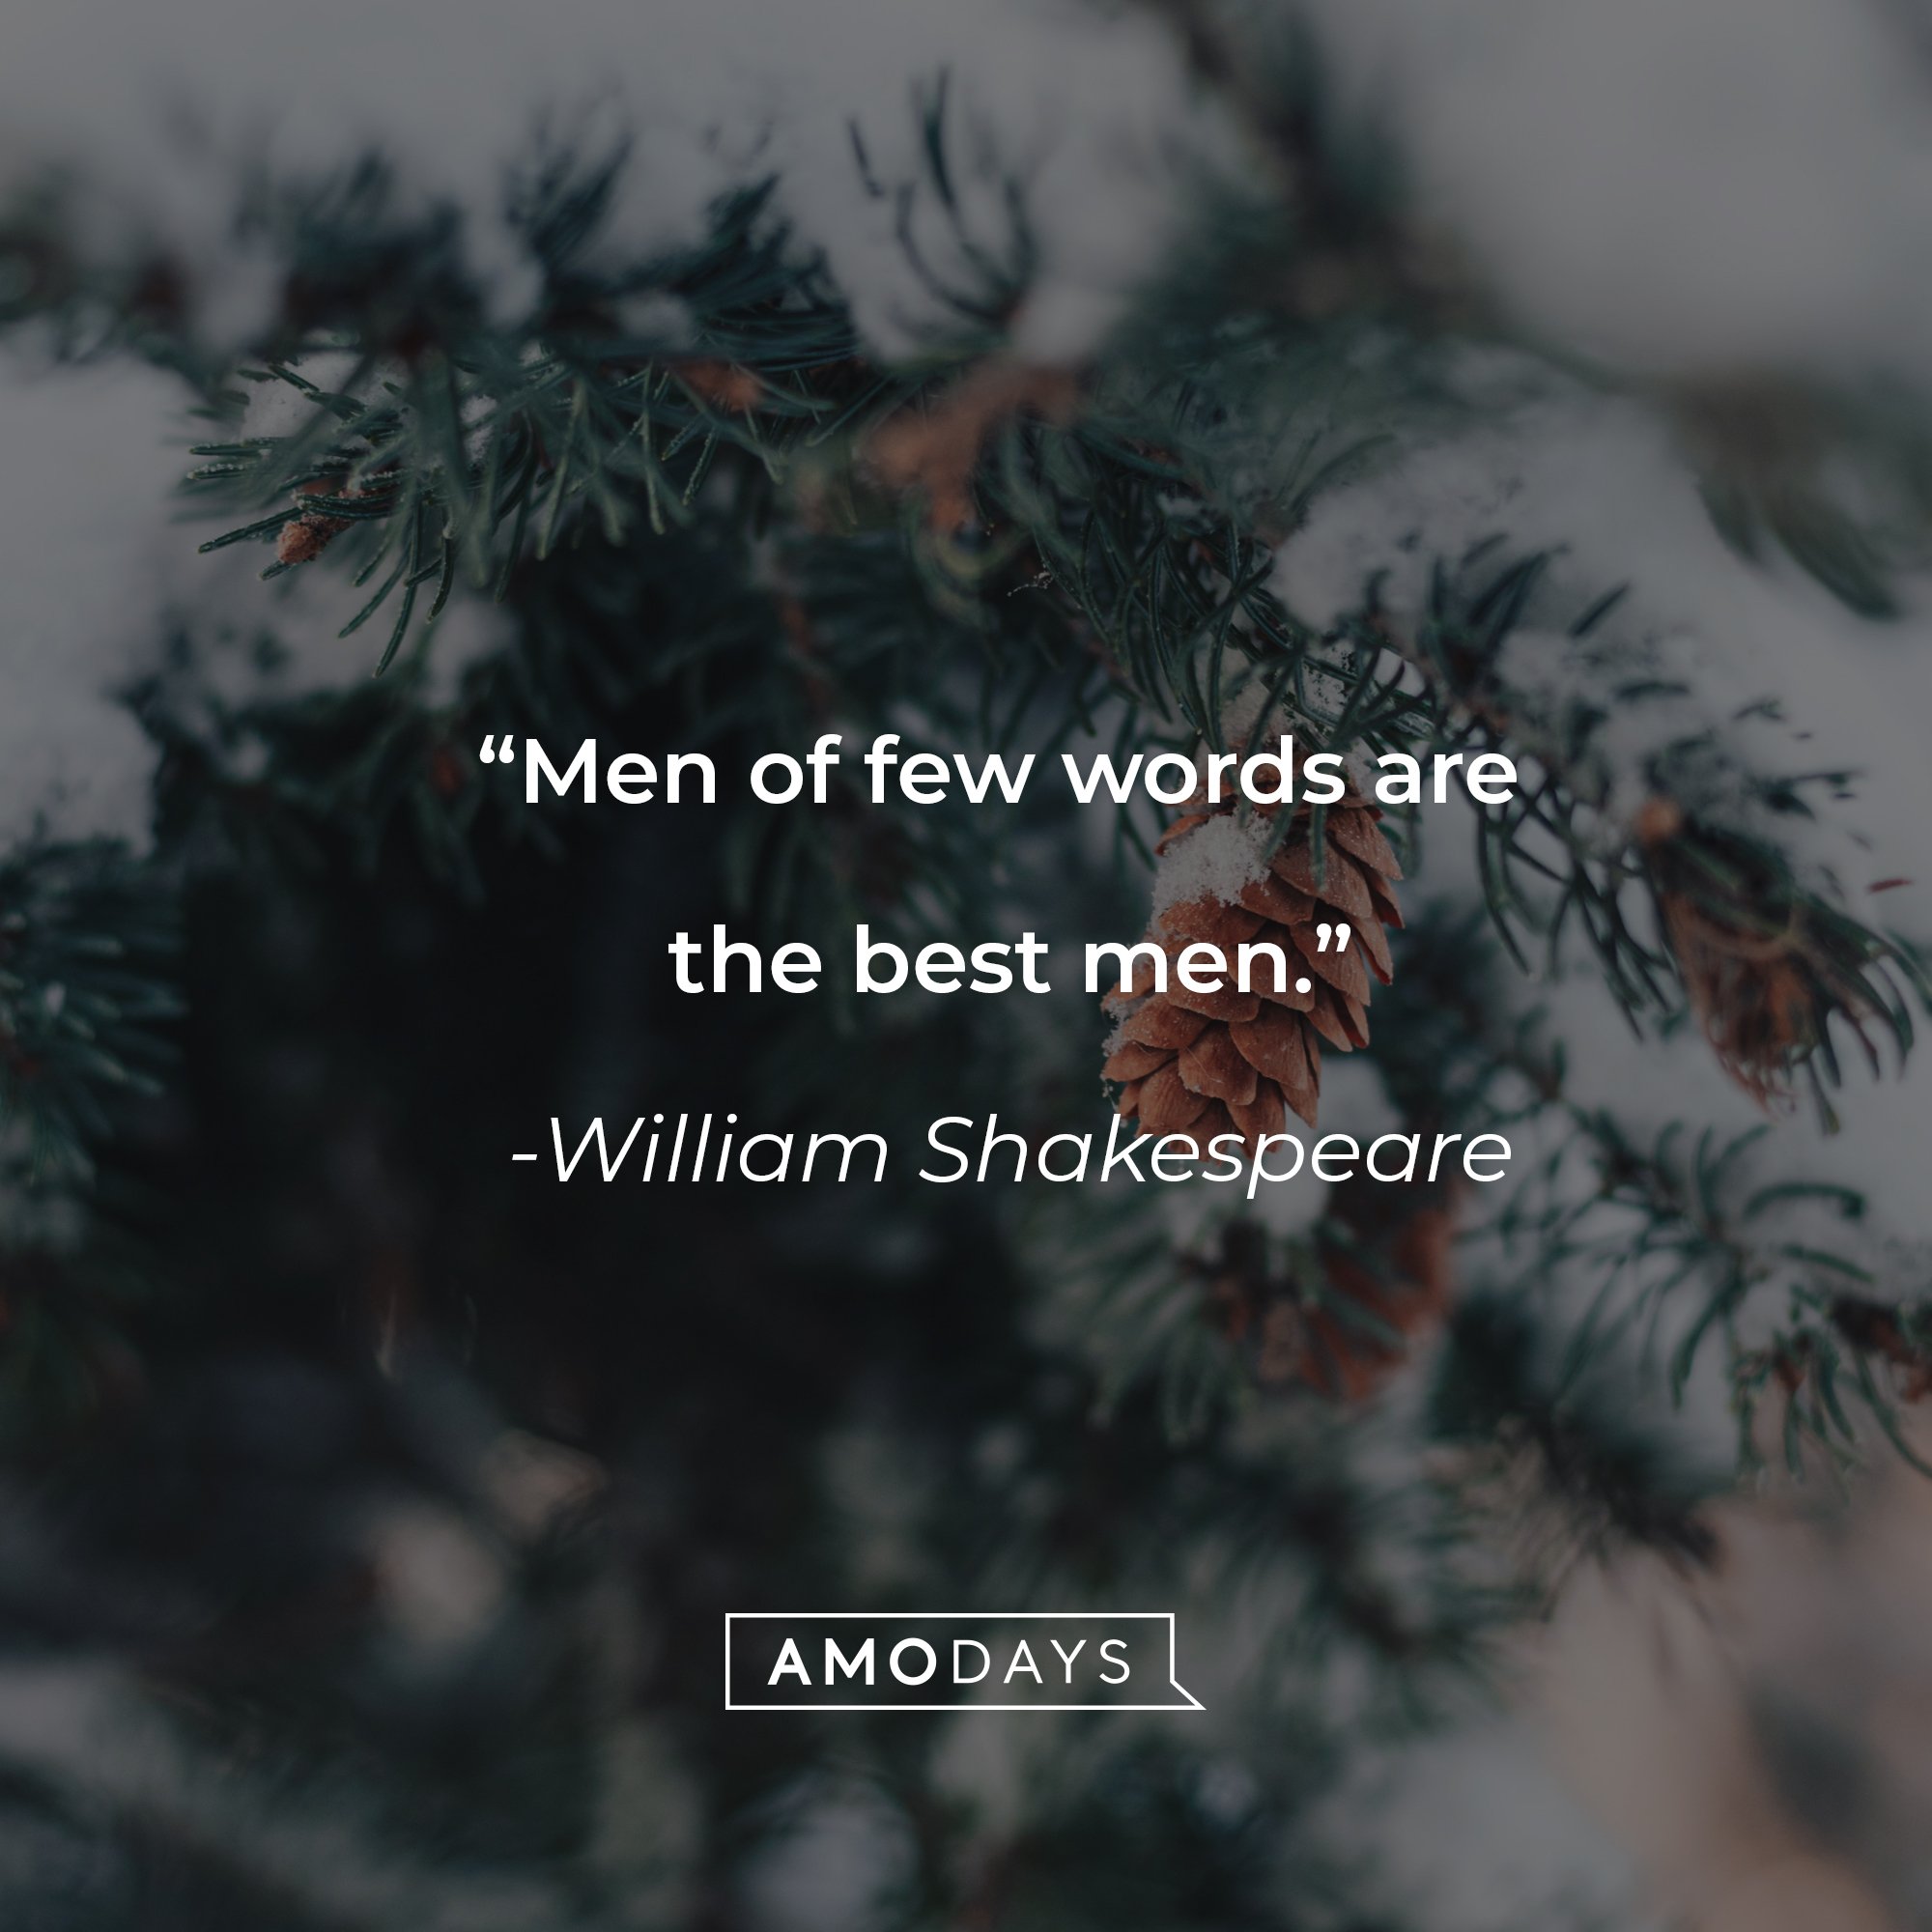 William Shakespeare's quote: “Men of few words are the best men.” | Image: AmoDays